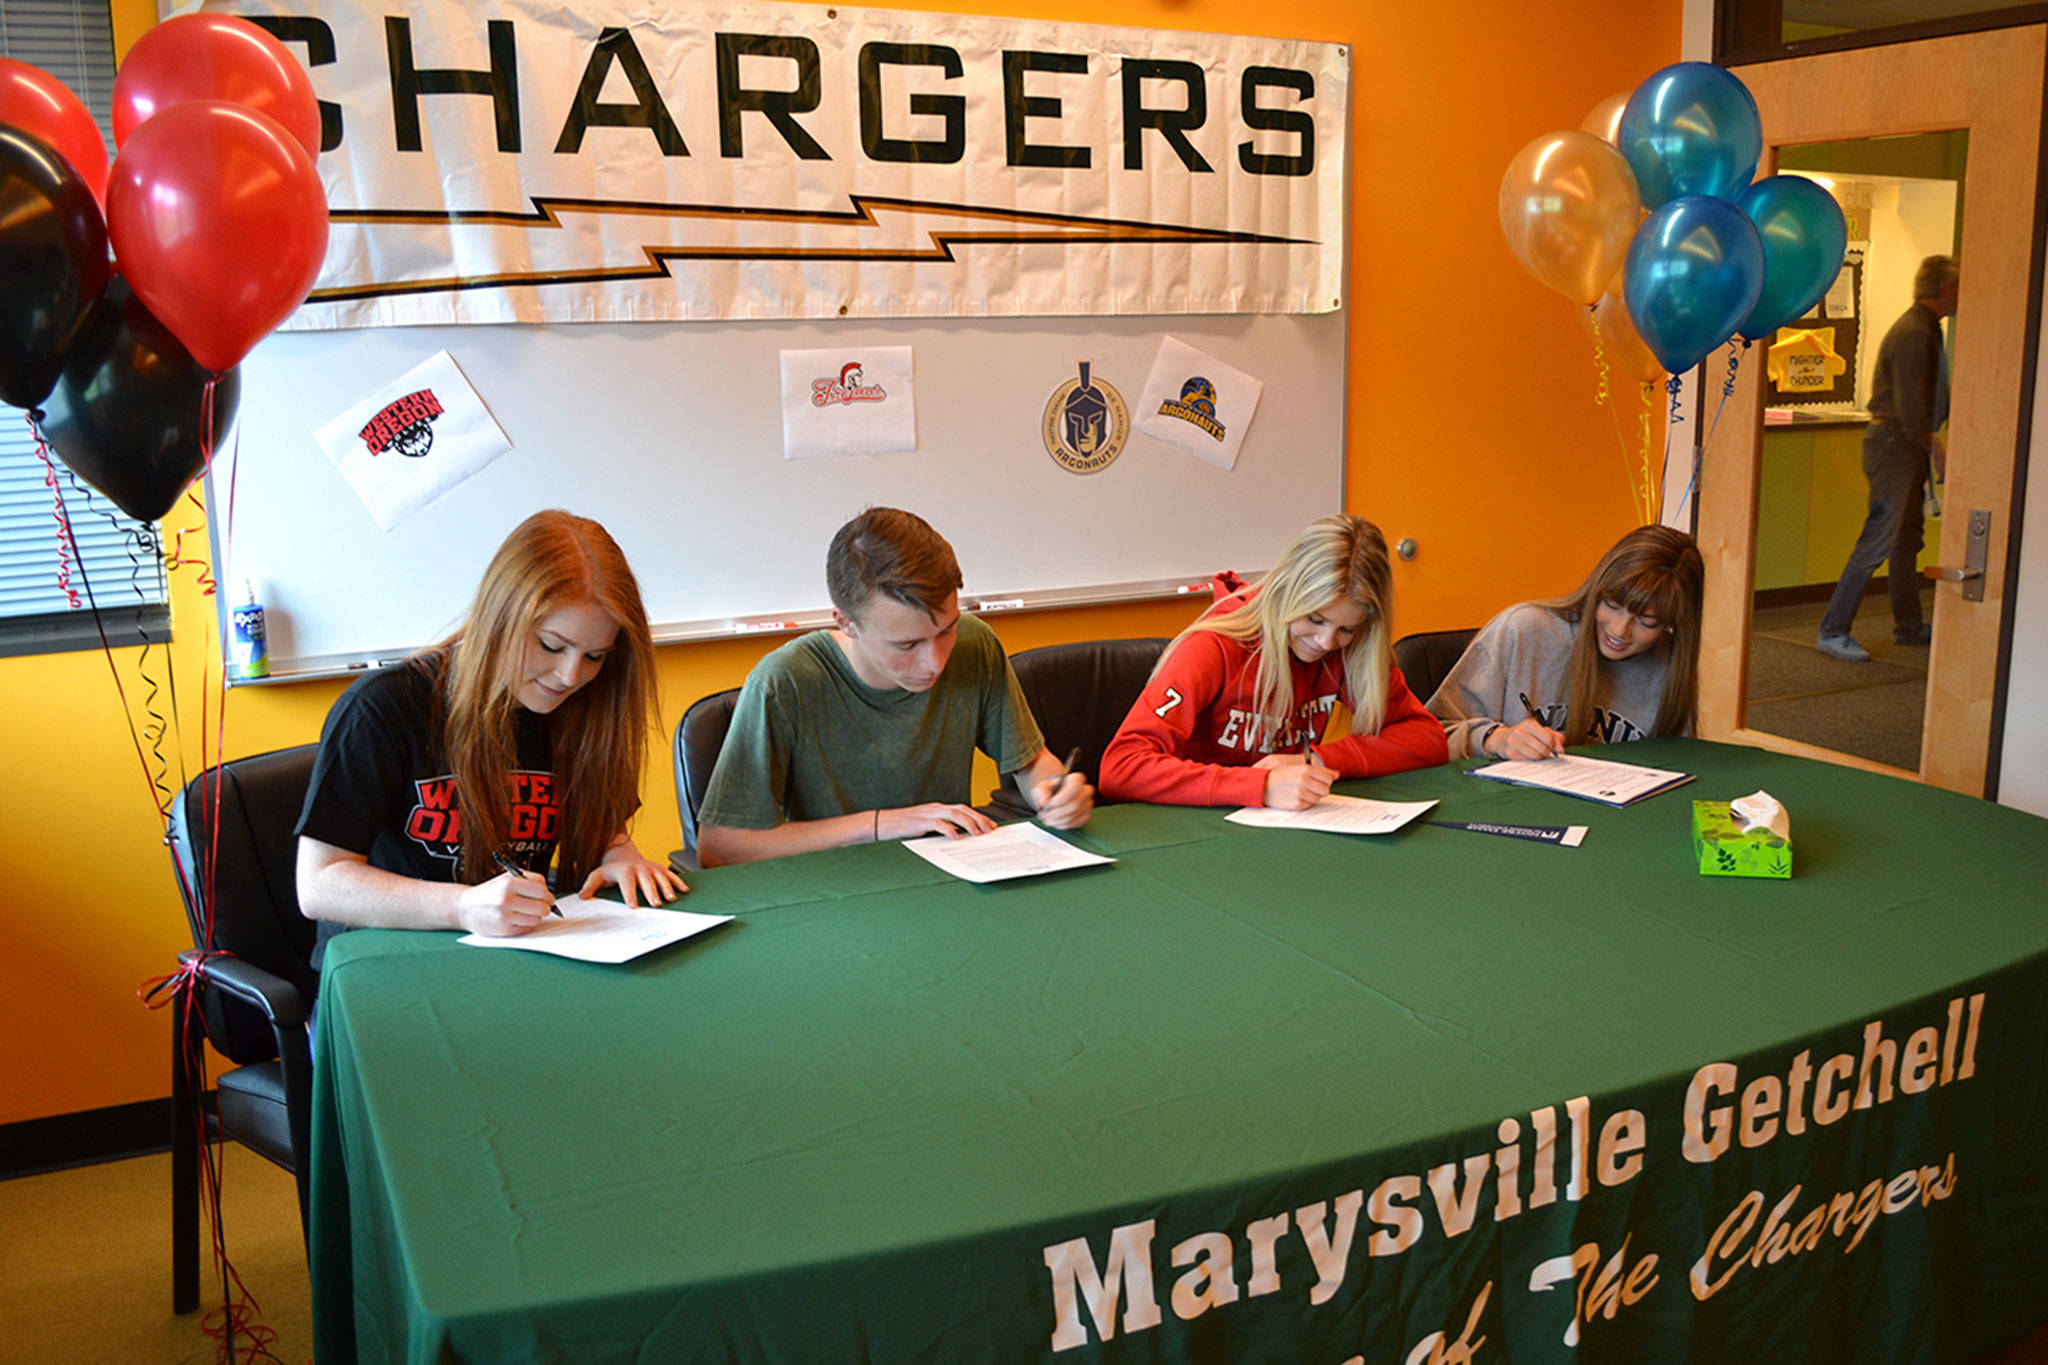 4 from MG to play sports in college